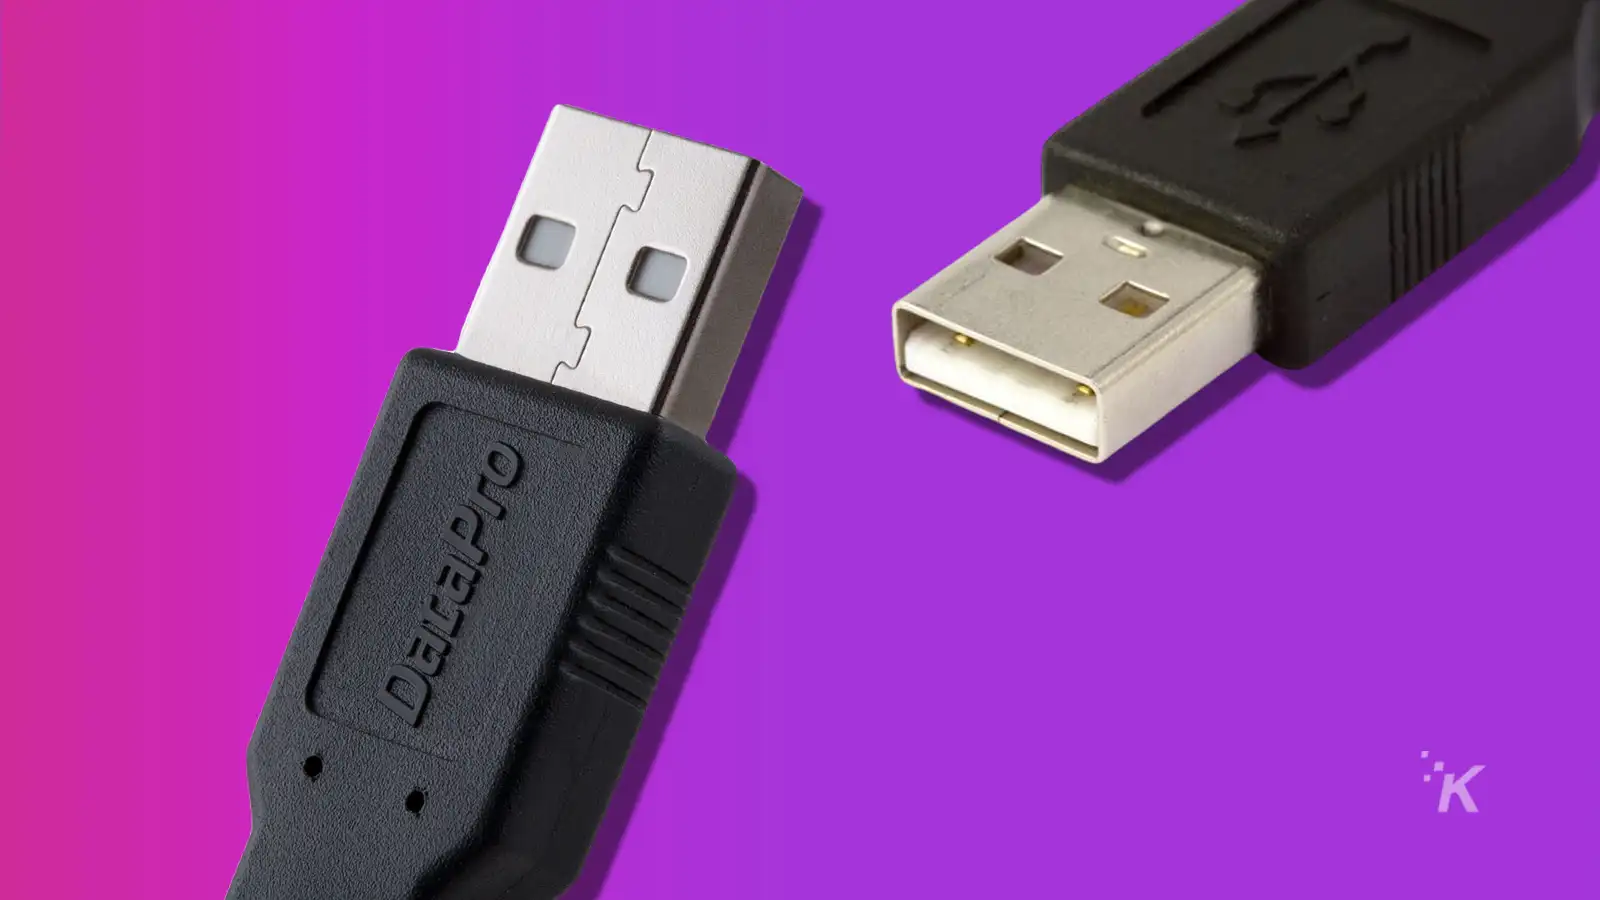 How to plug a USB cable in the right way every time